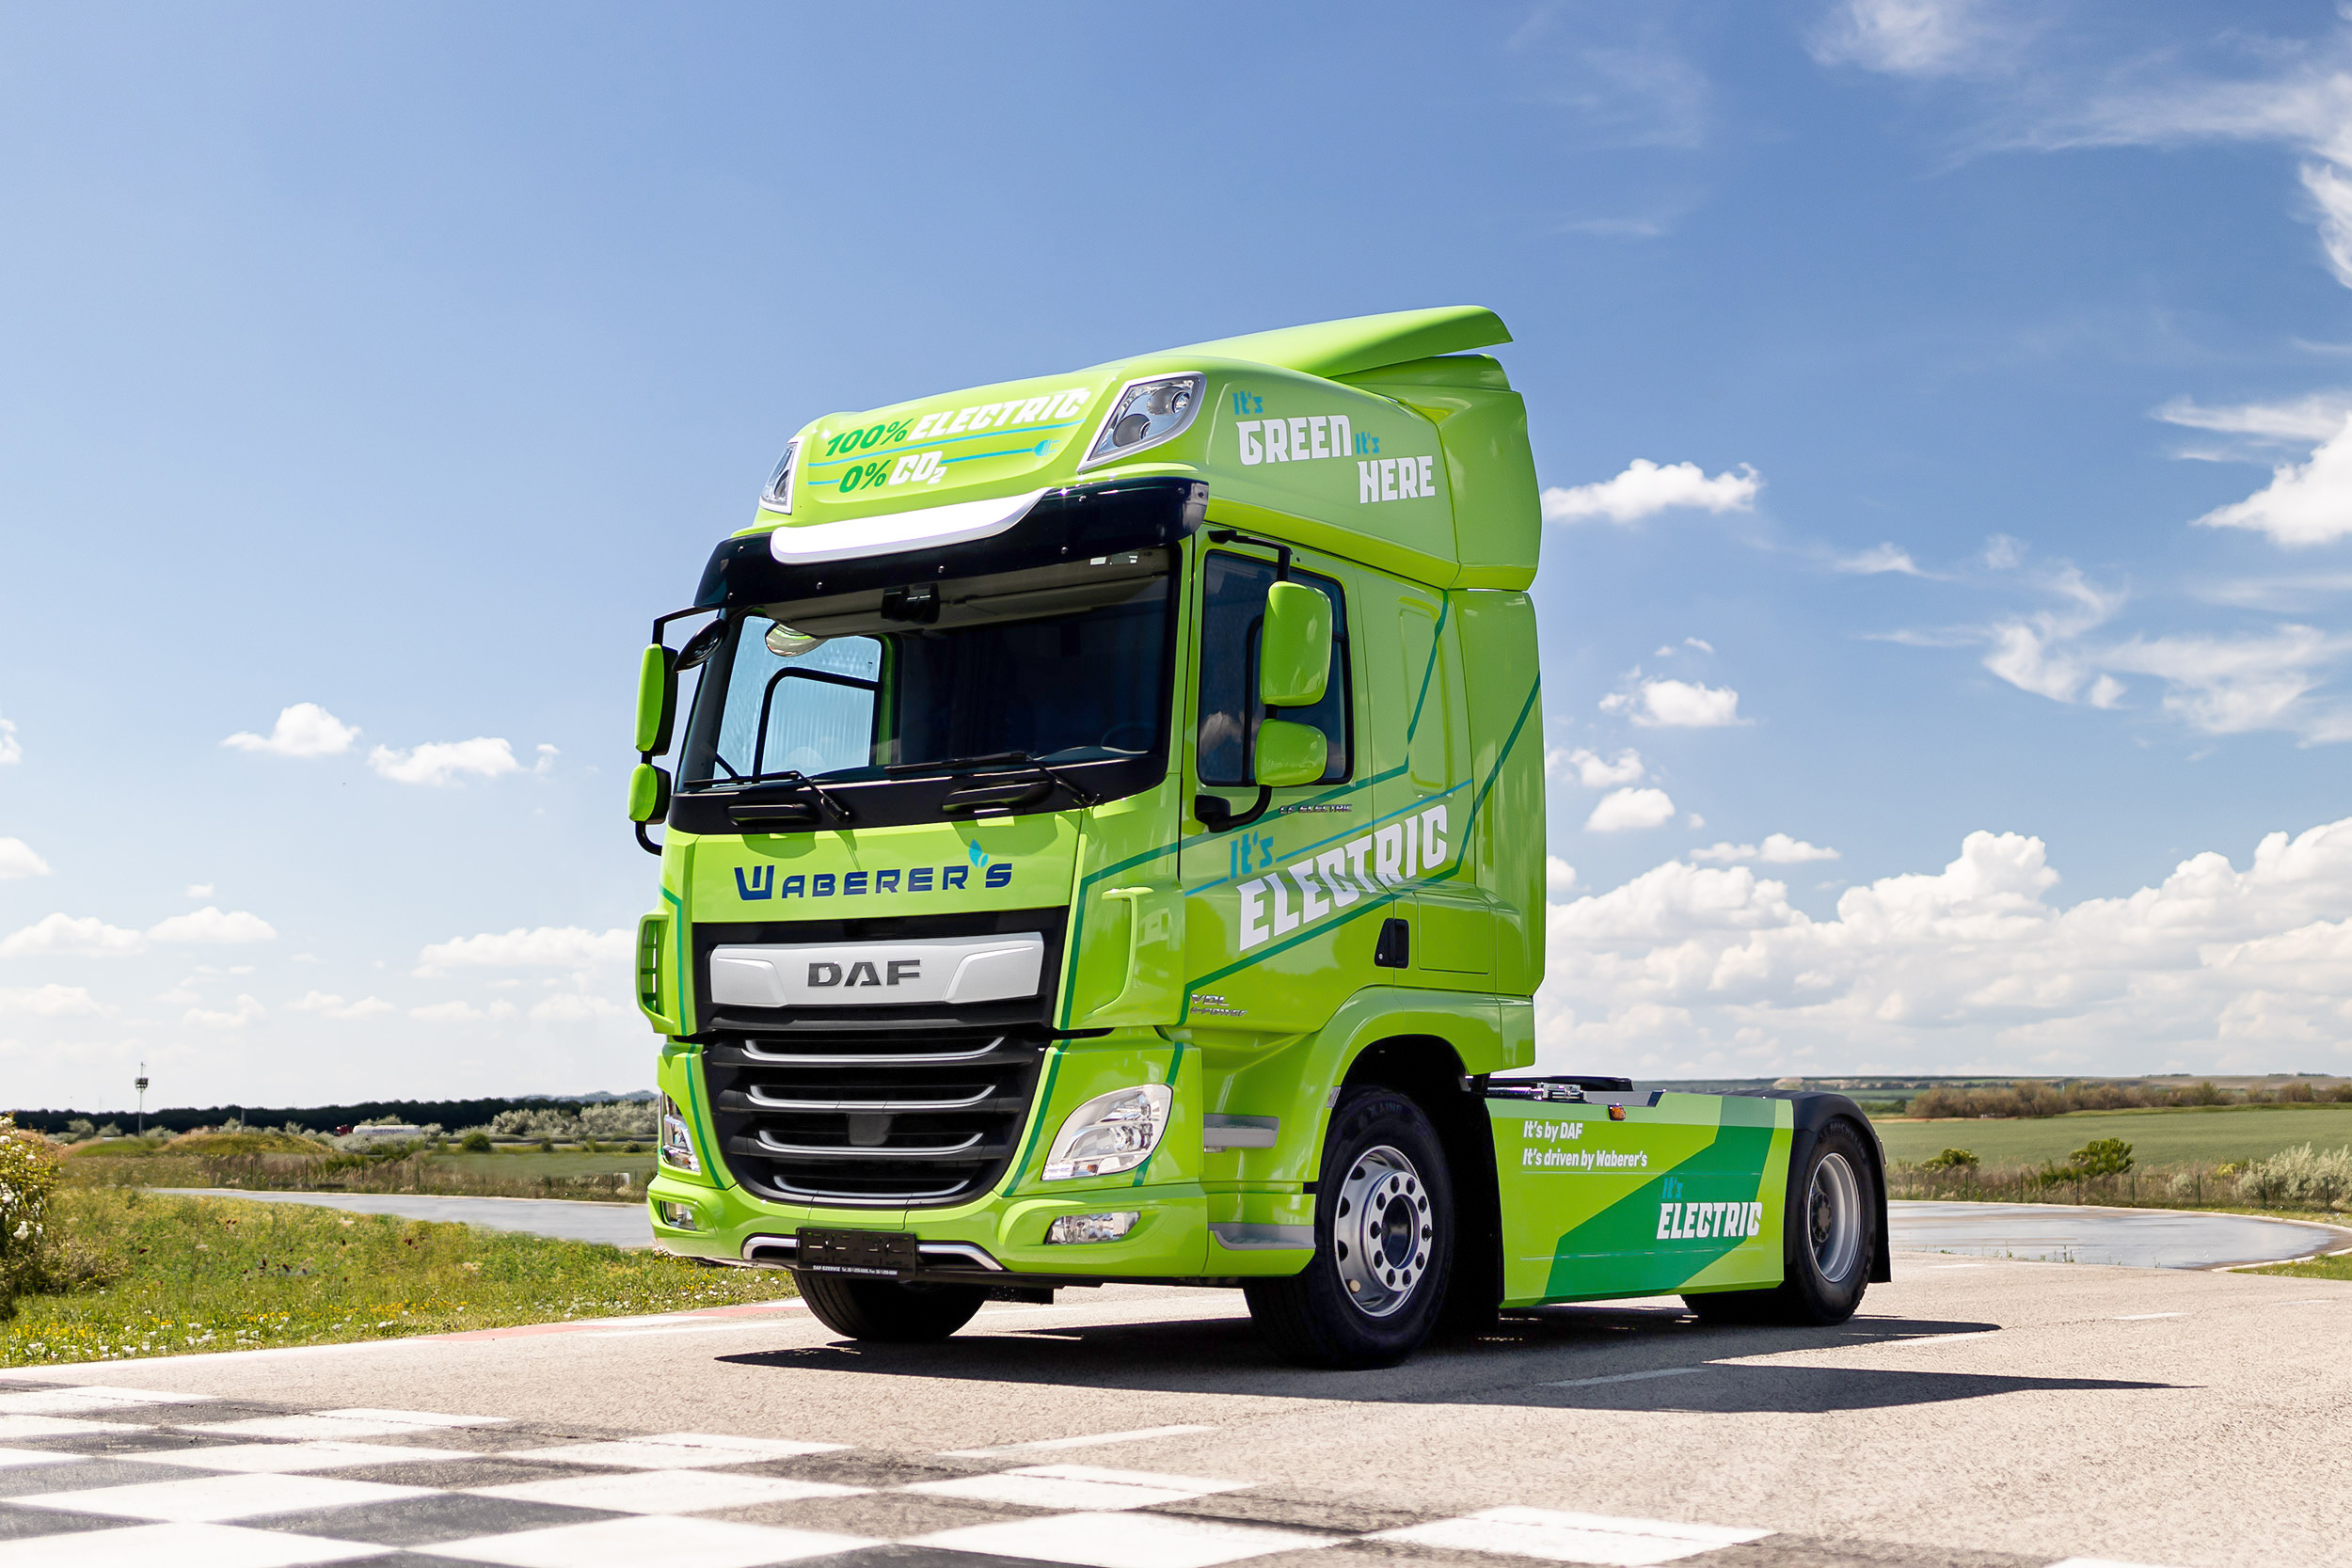 Leading Hungarian logistics provider Waberer’s has received its first fully electric heavy-duty distribution vehicle: a DAF CF Electric 4x2 tractor.